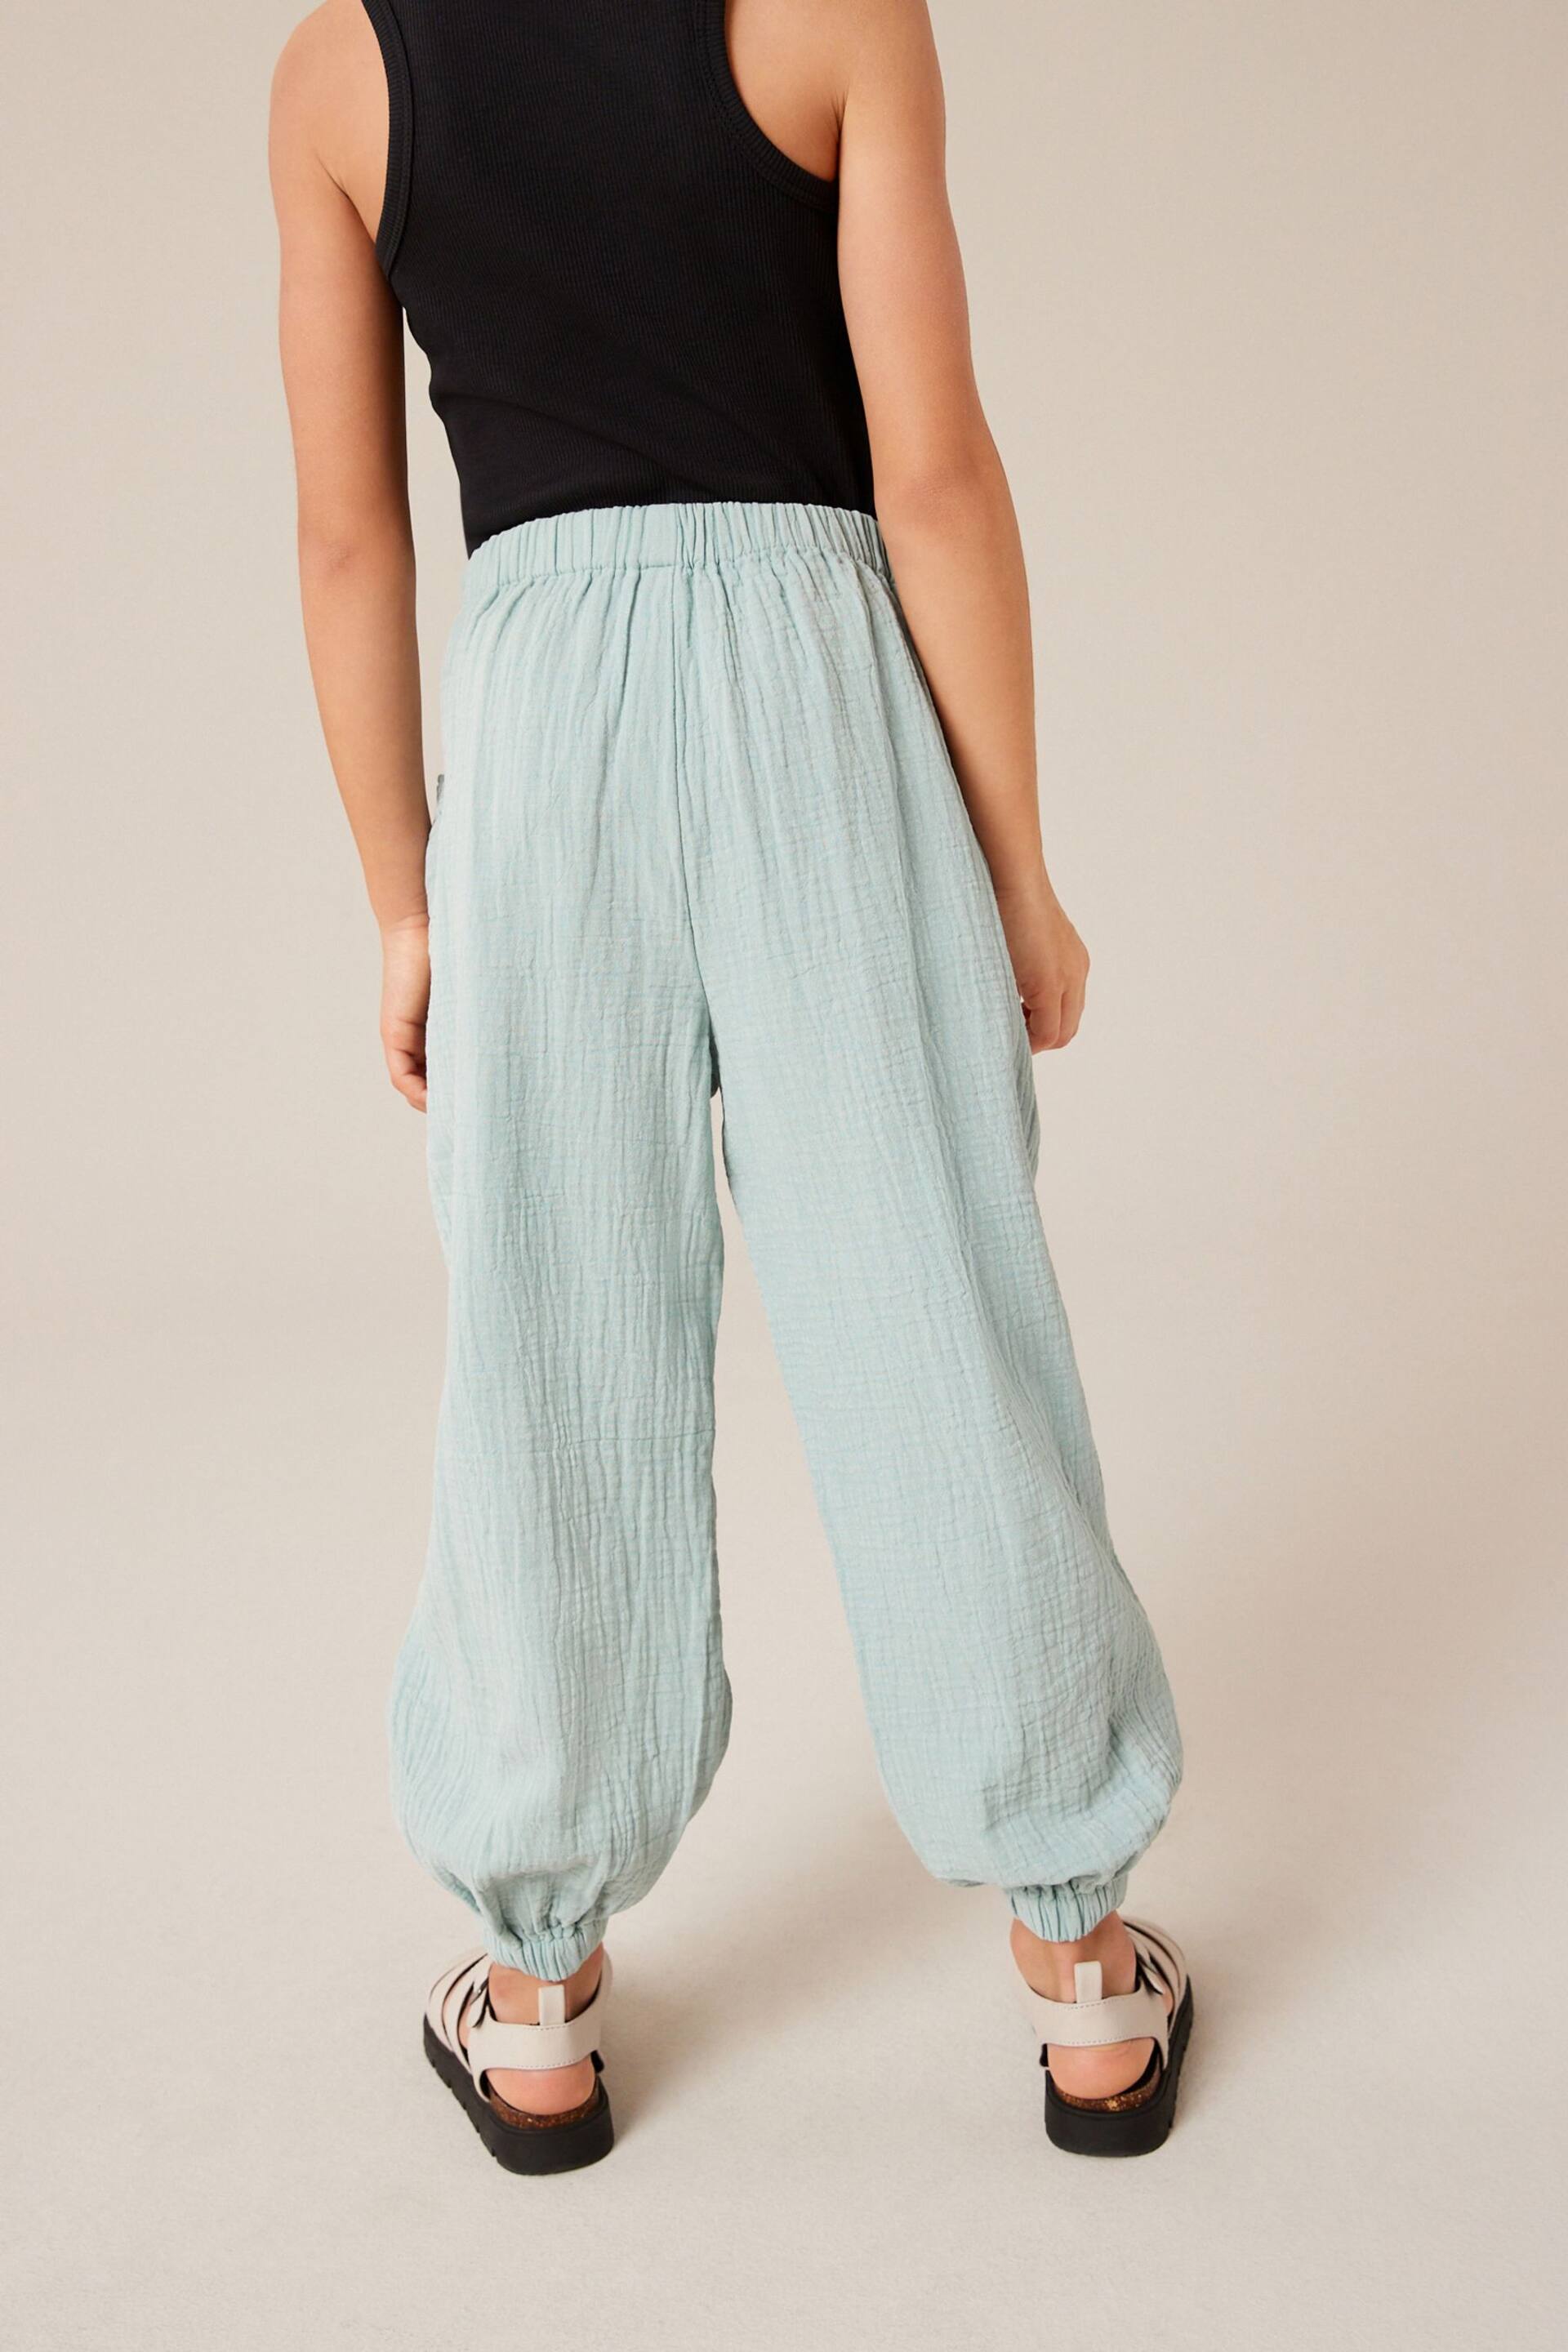 Teal Blue Textured Pull-On Trousers (3-16yrs) - Image 4 of 7